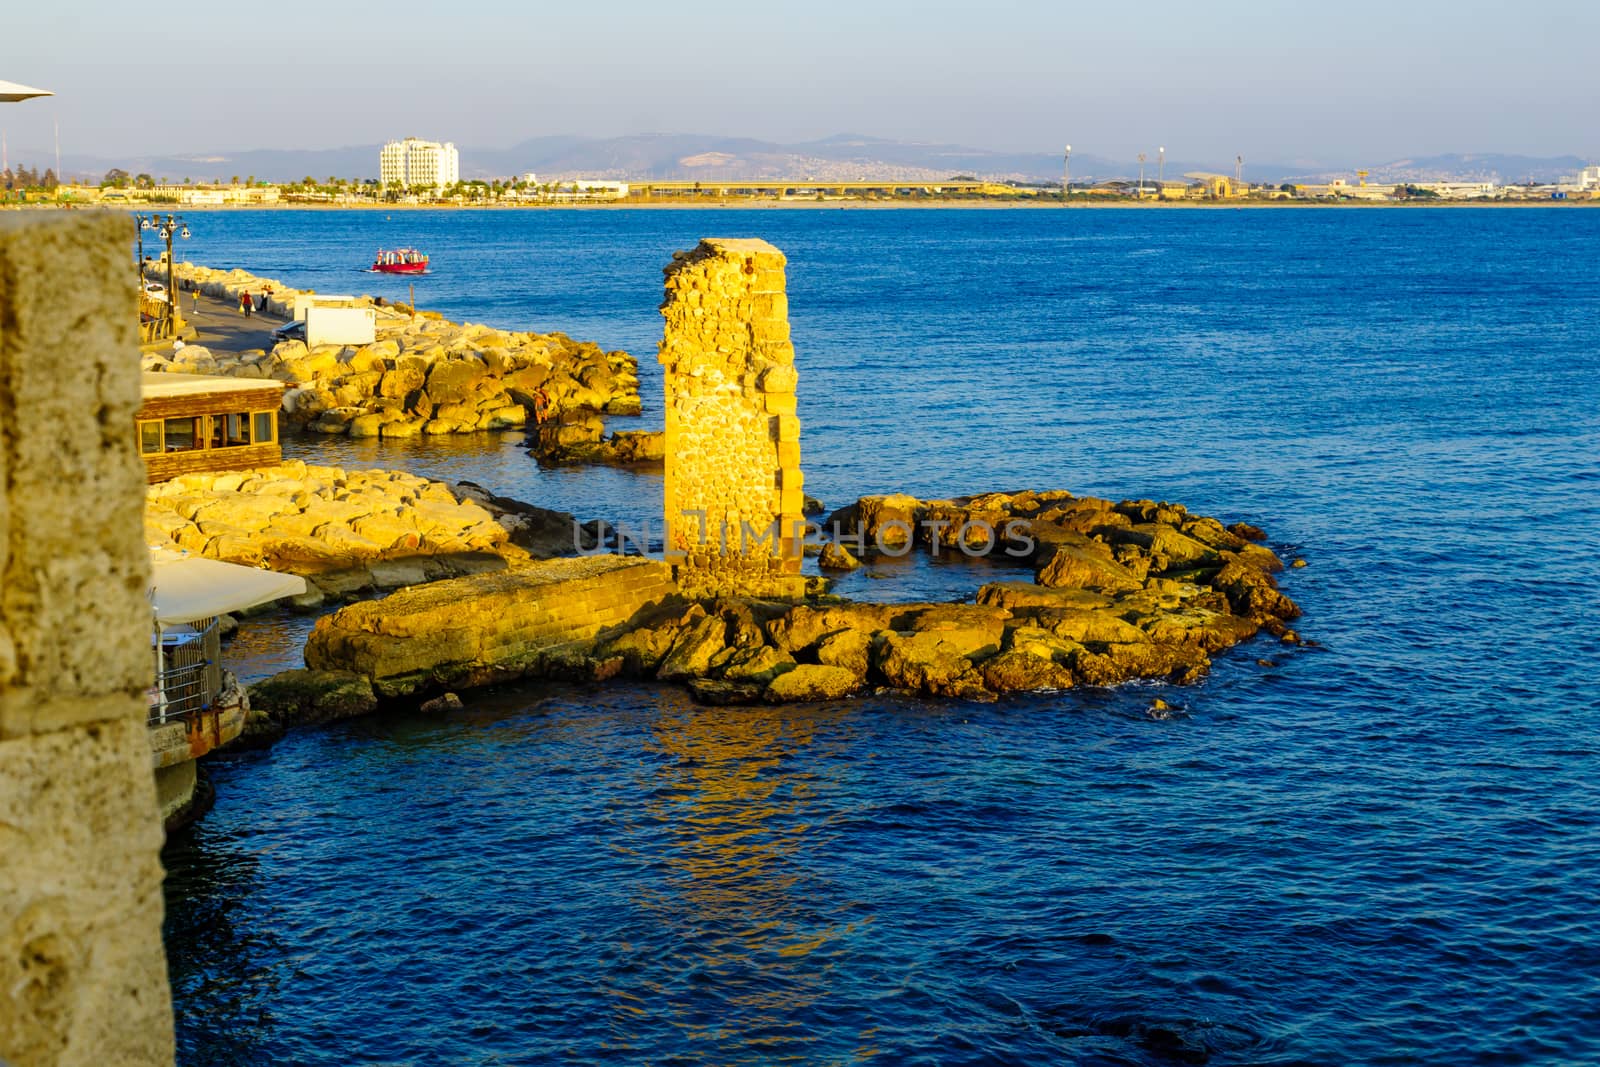 Wall remains and the coast, old city of Acre by RnDmS